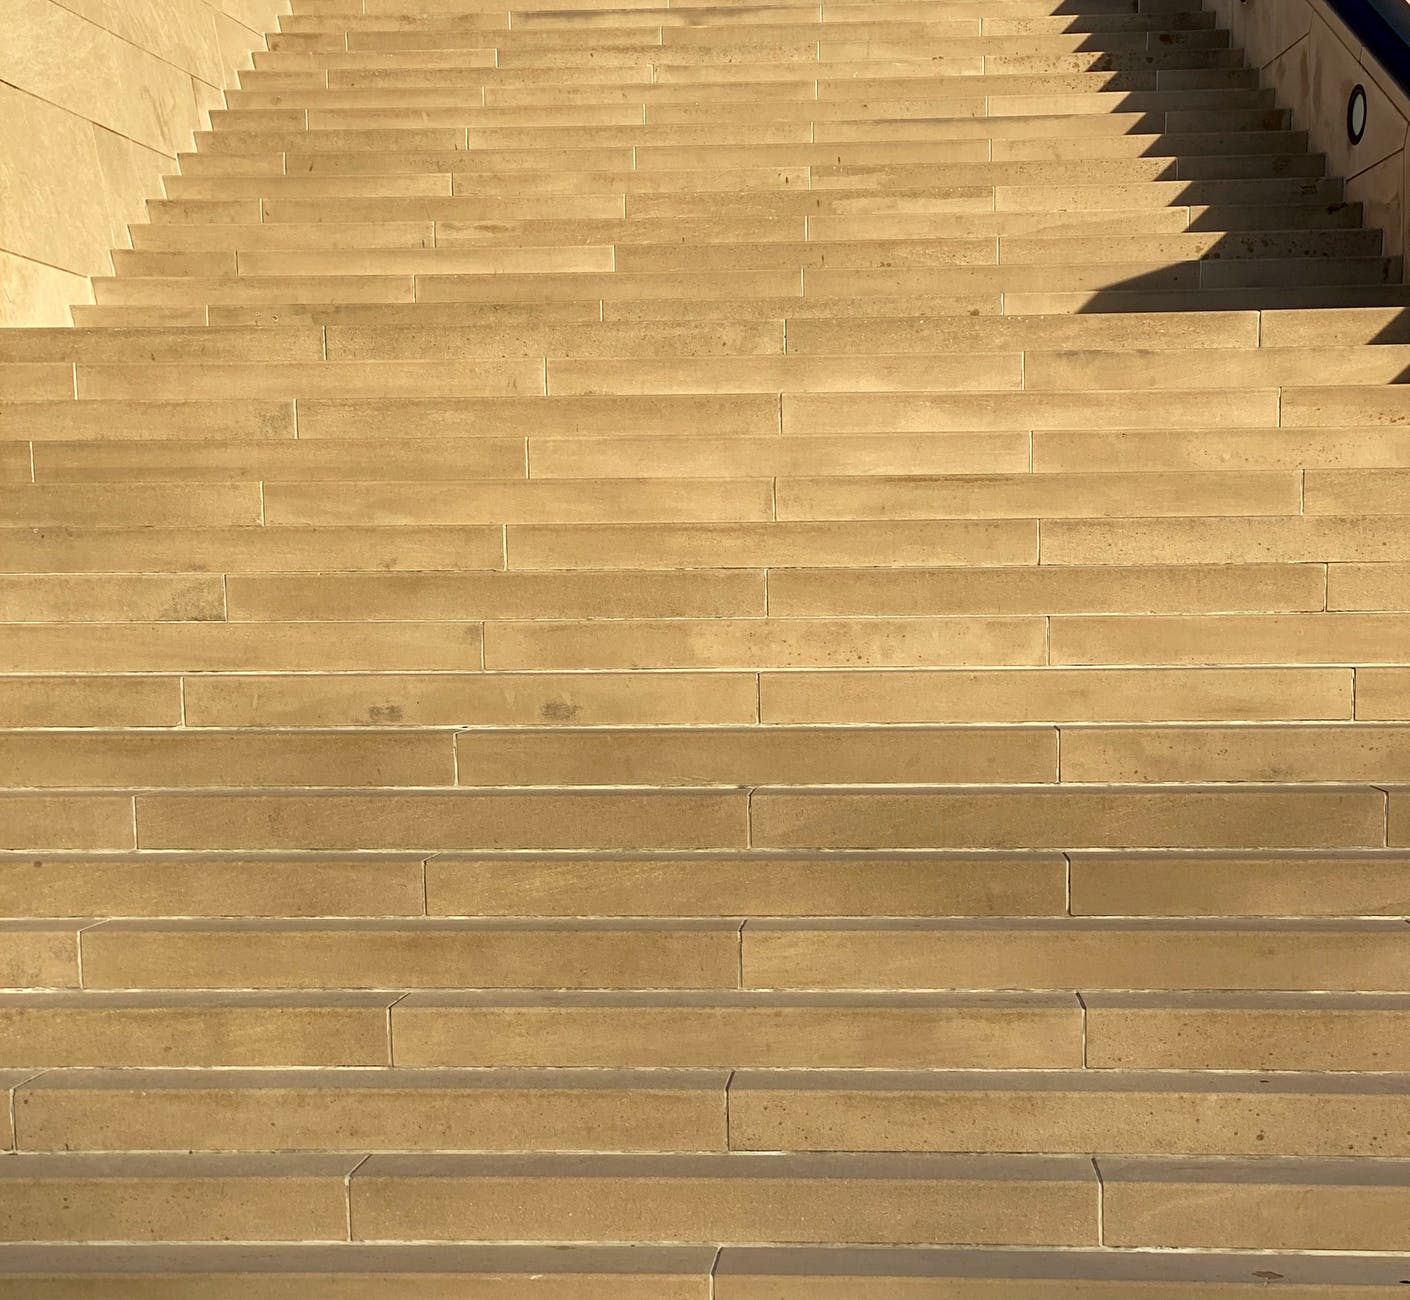 empty stairs on street in daylight